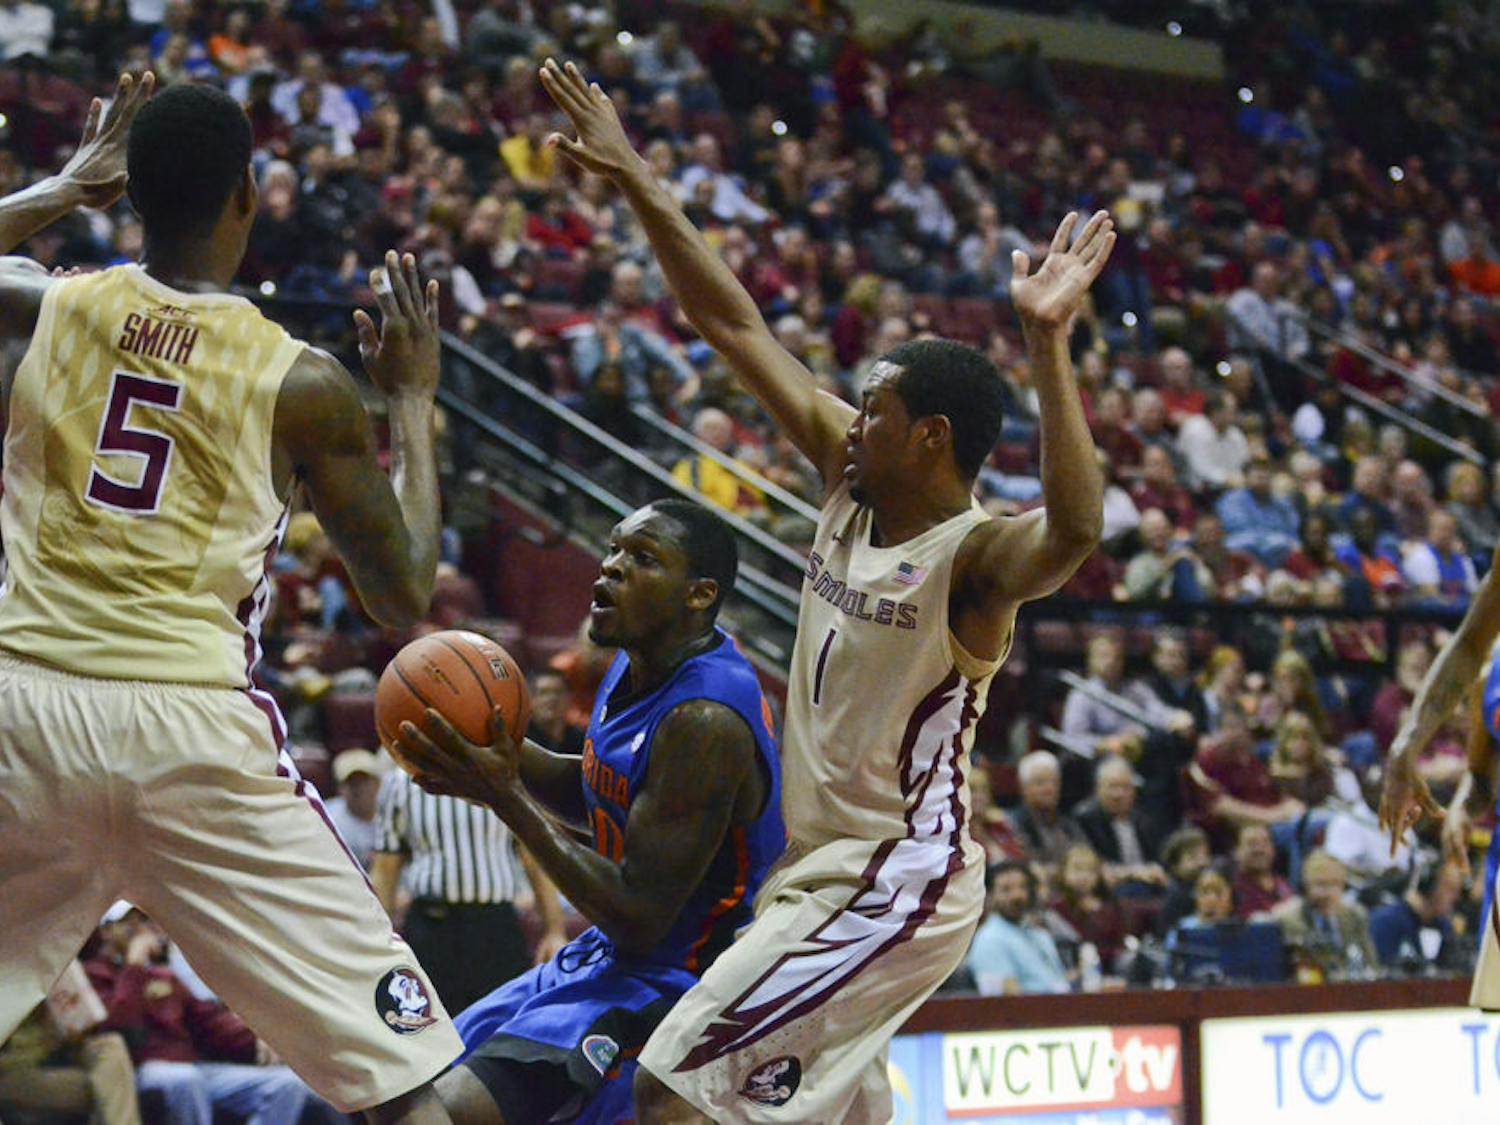 Michael Frazier II drives into the paint during Florida's 65-63 loss to Florida State on Dec. 30 in Tallahasee.